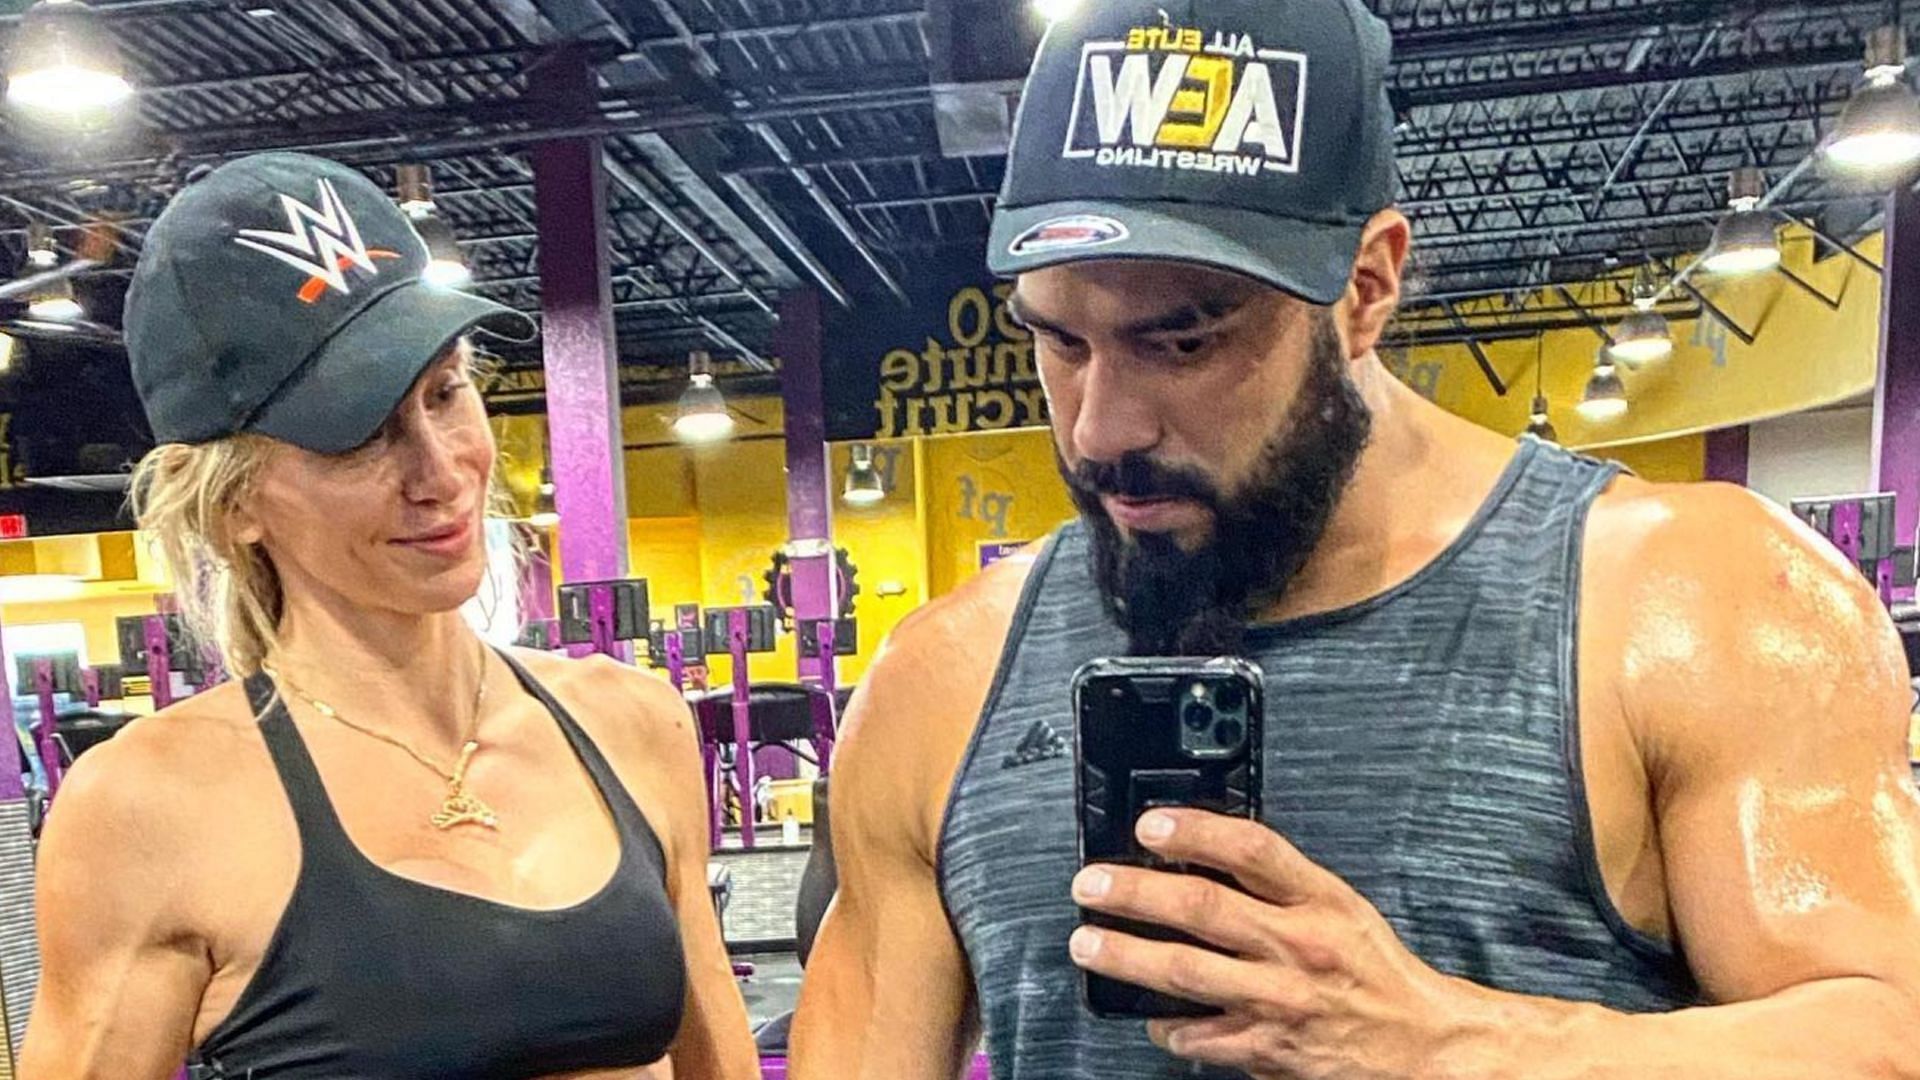 Charlotte Flair wears her WWE hat at the gym, Andrade wears his AEW hat at the gym